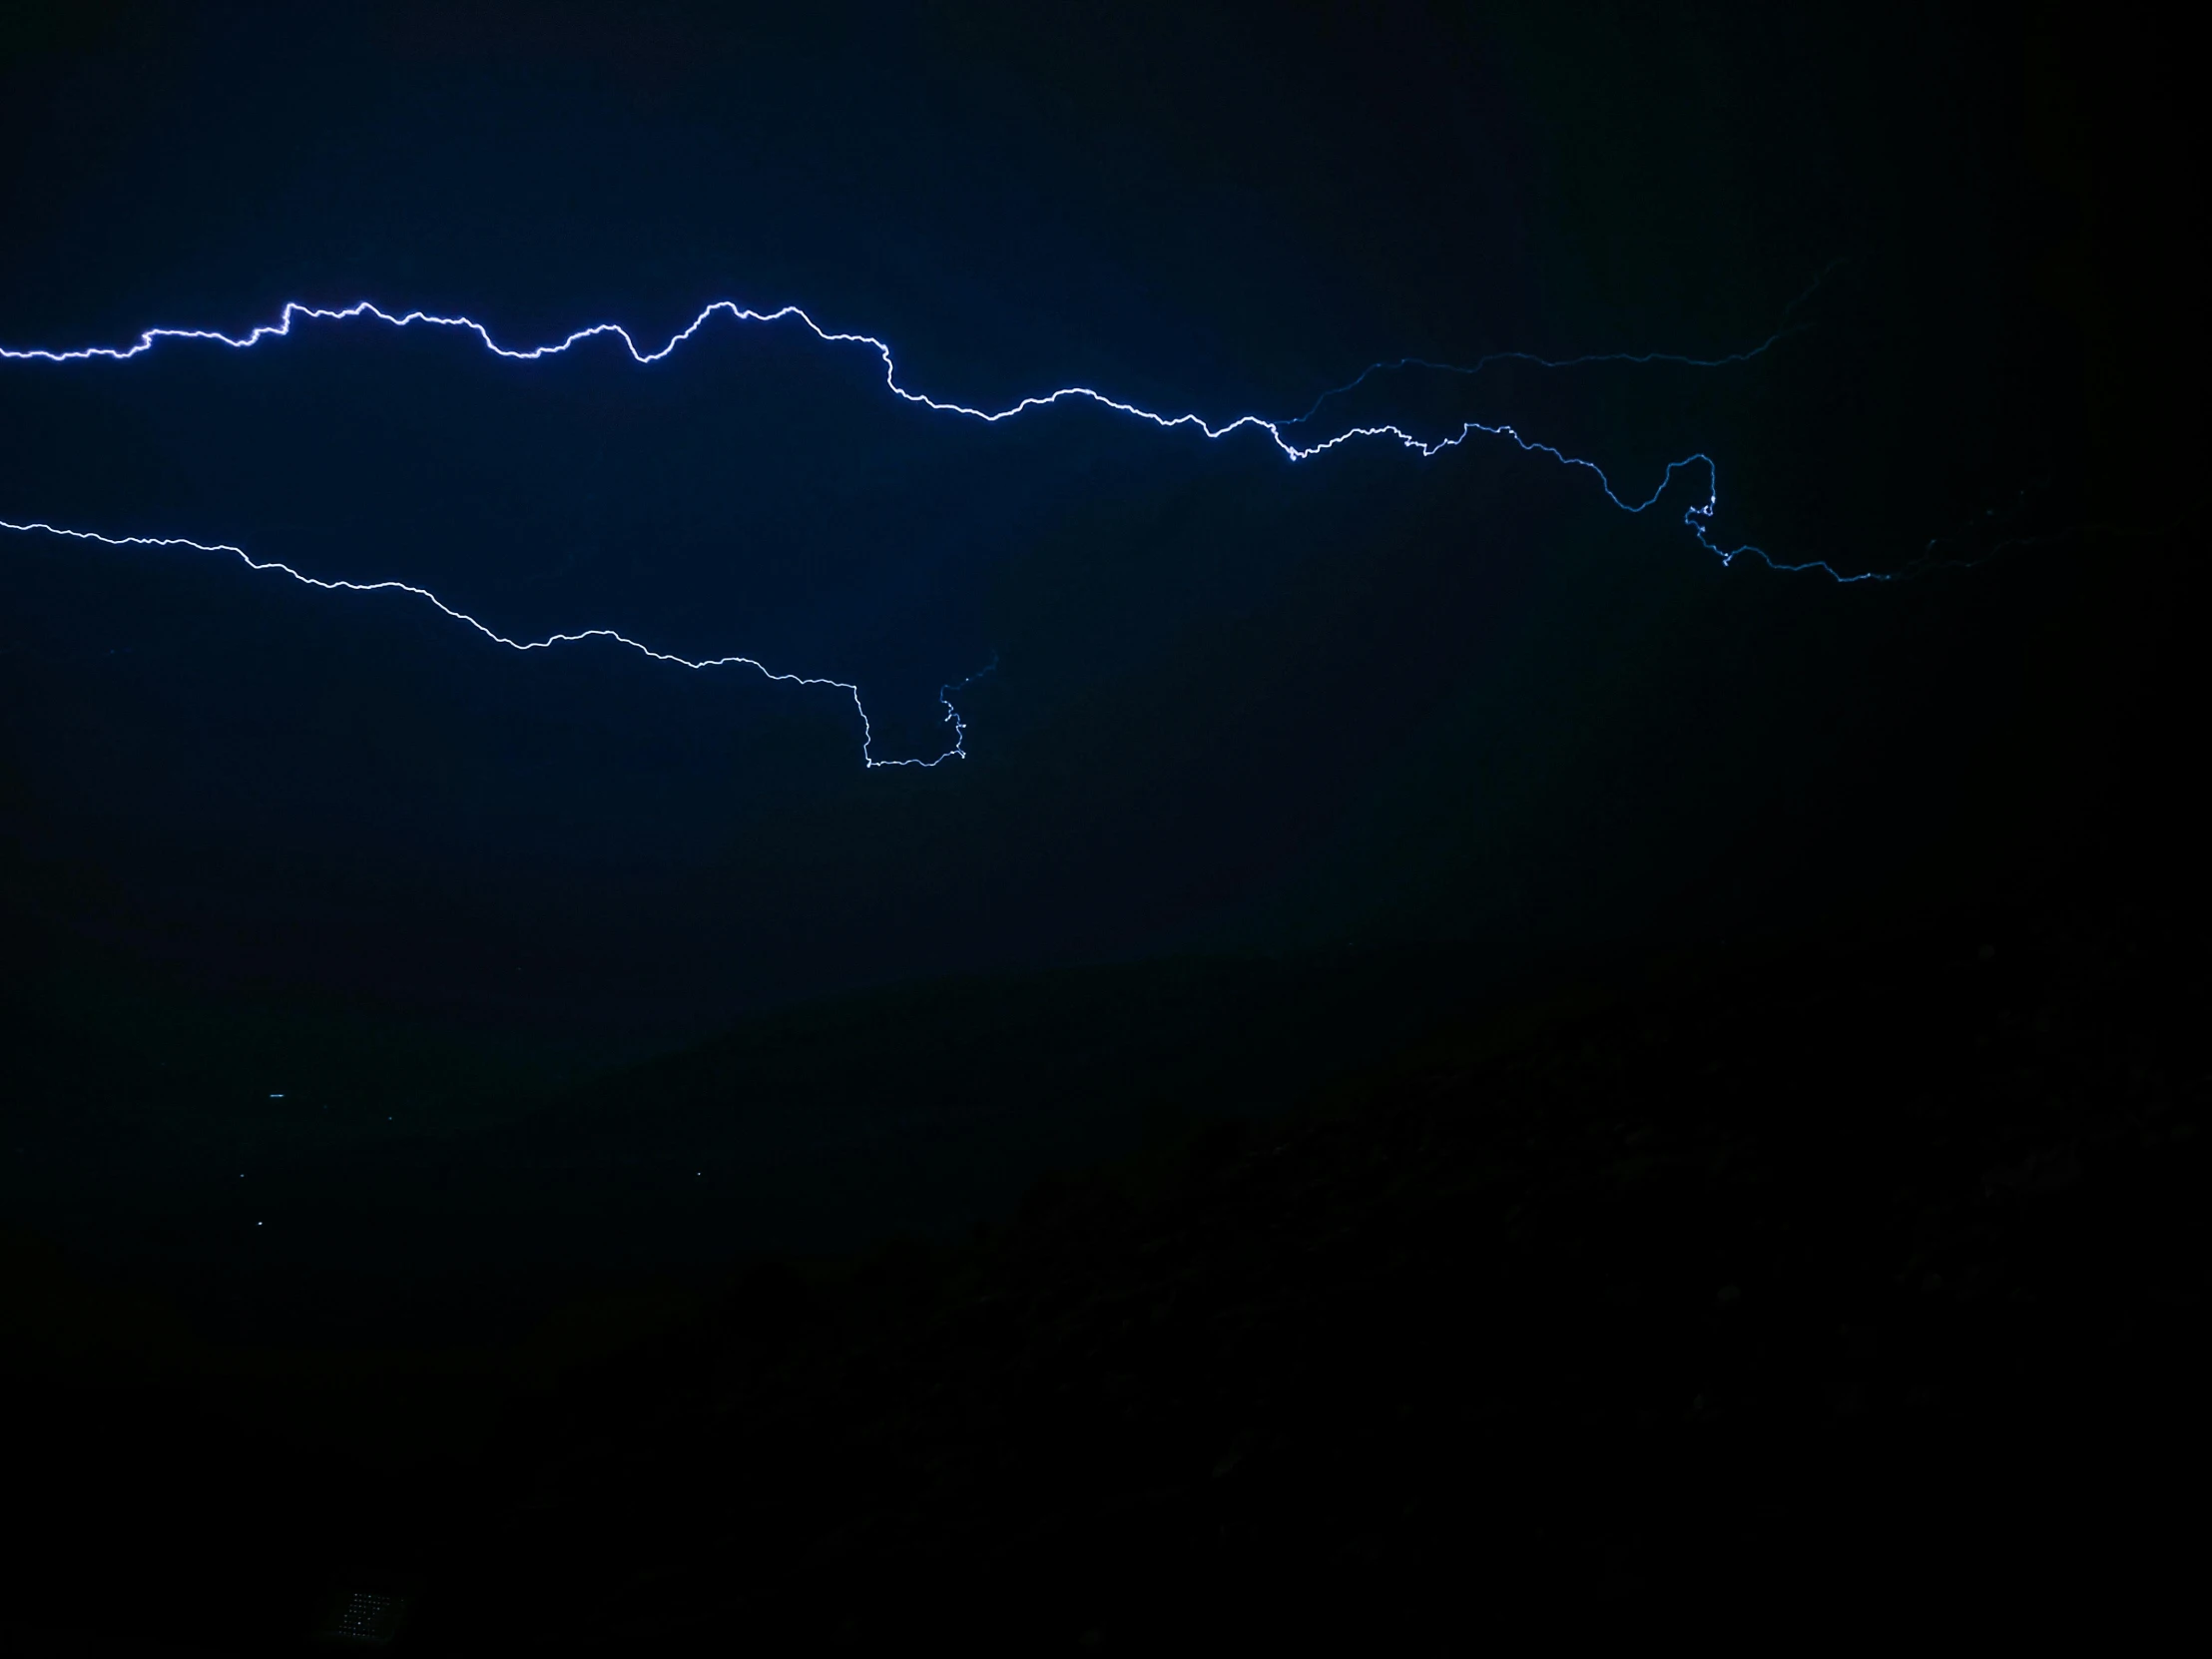 the image is very blurry with this image of lightning